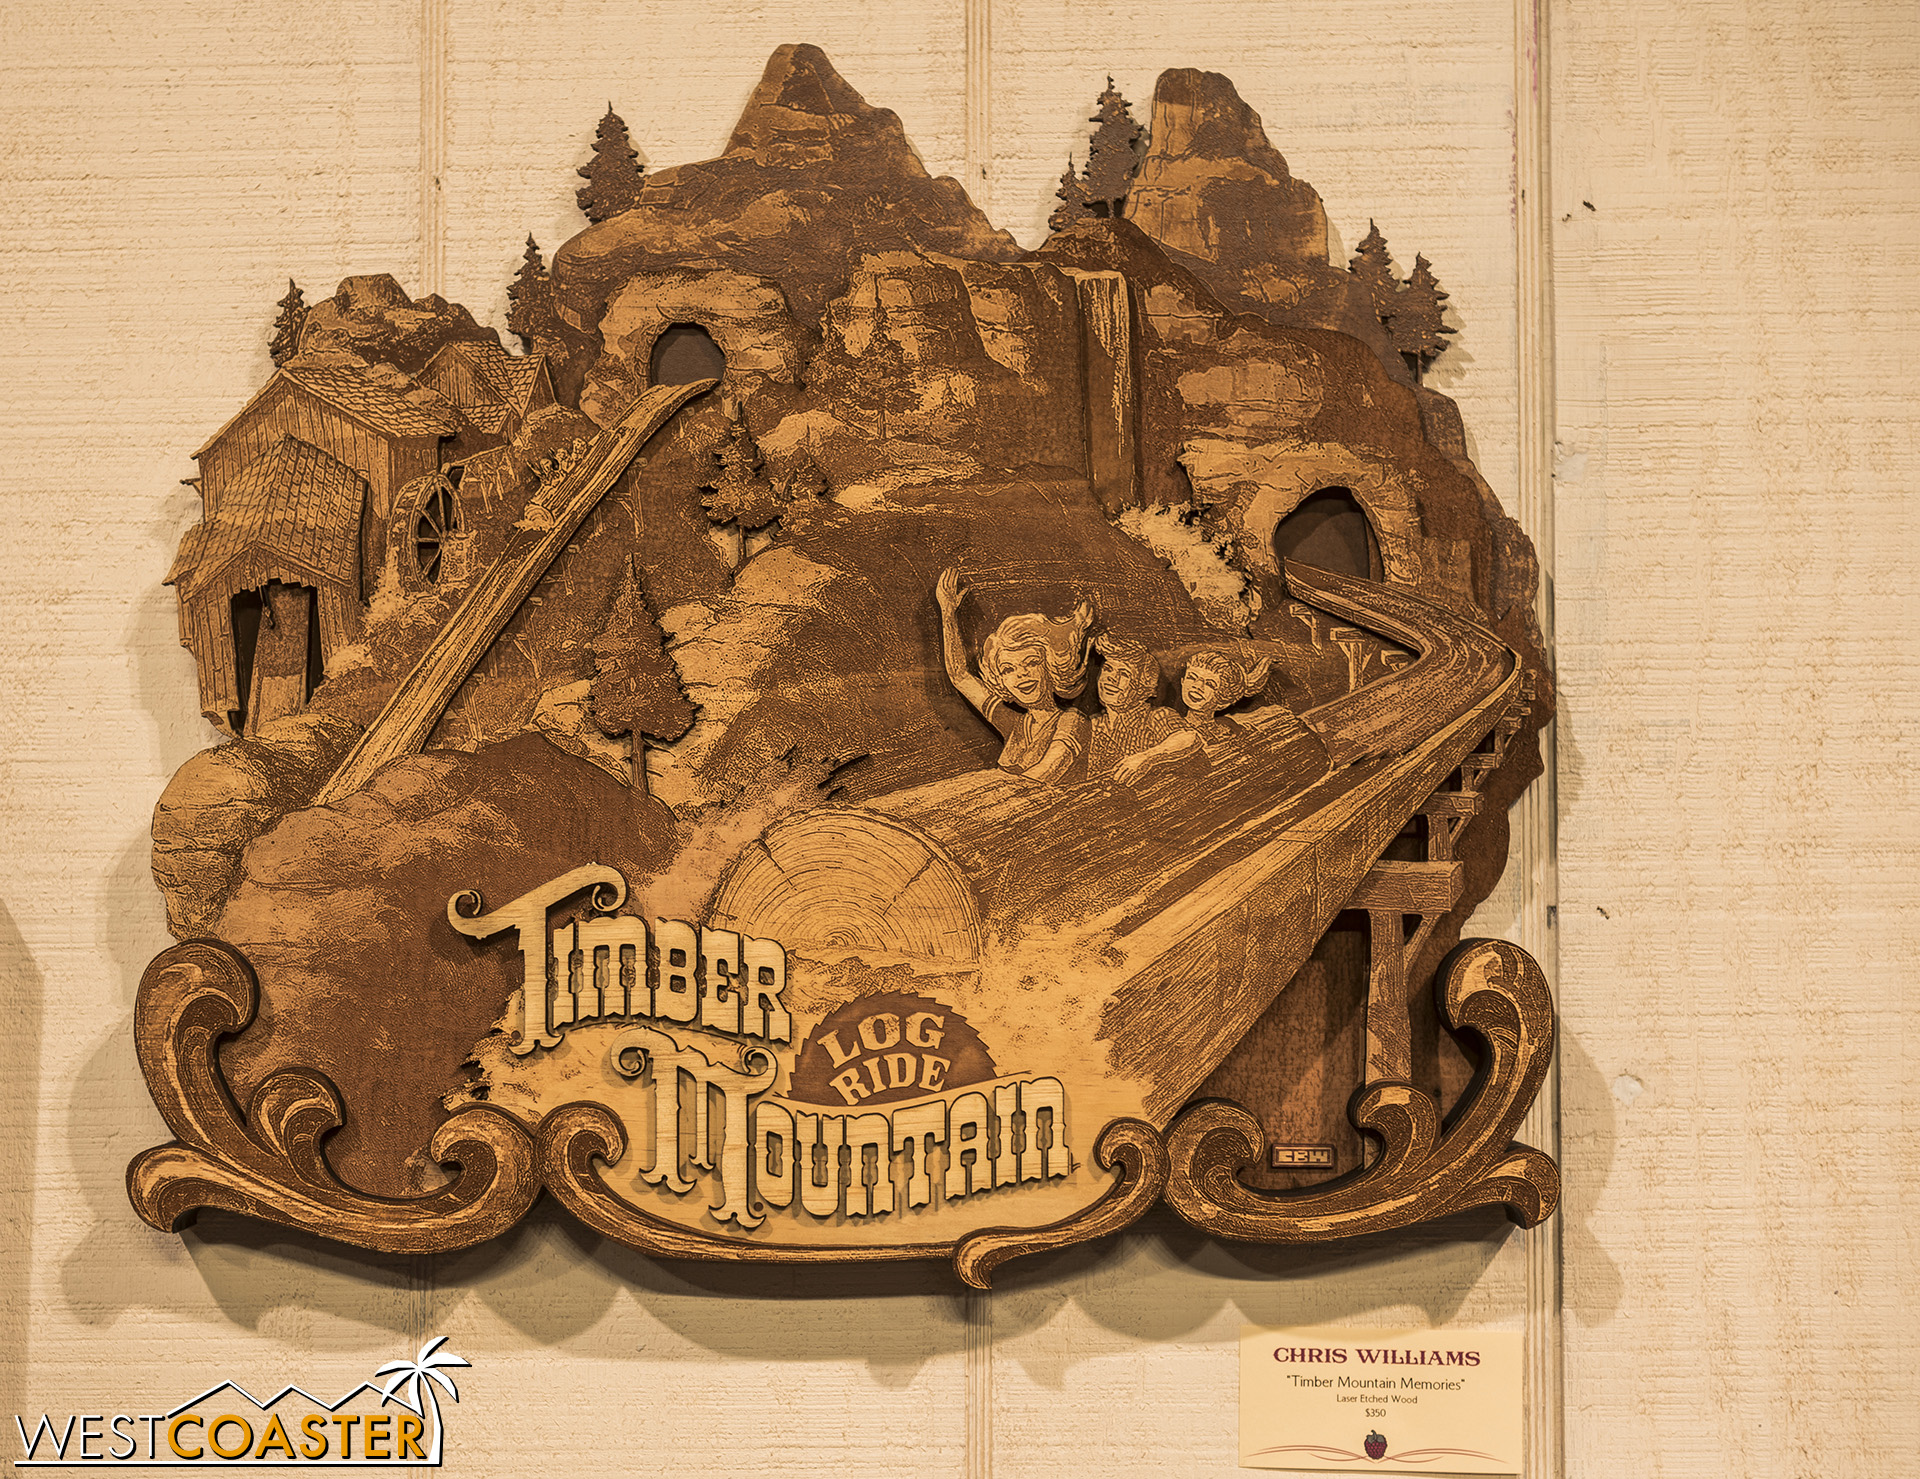  A woodcut of the Log Ride is certainly fitting. 